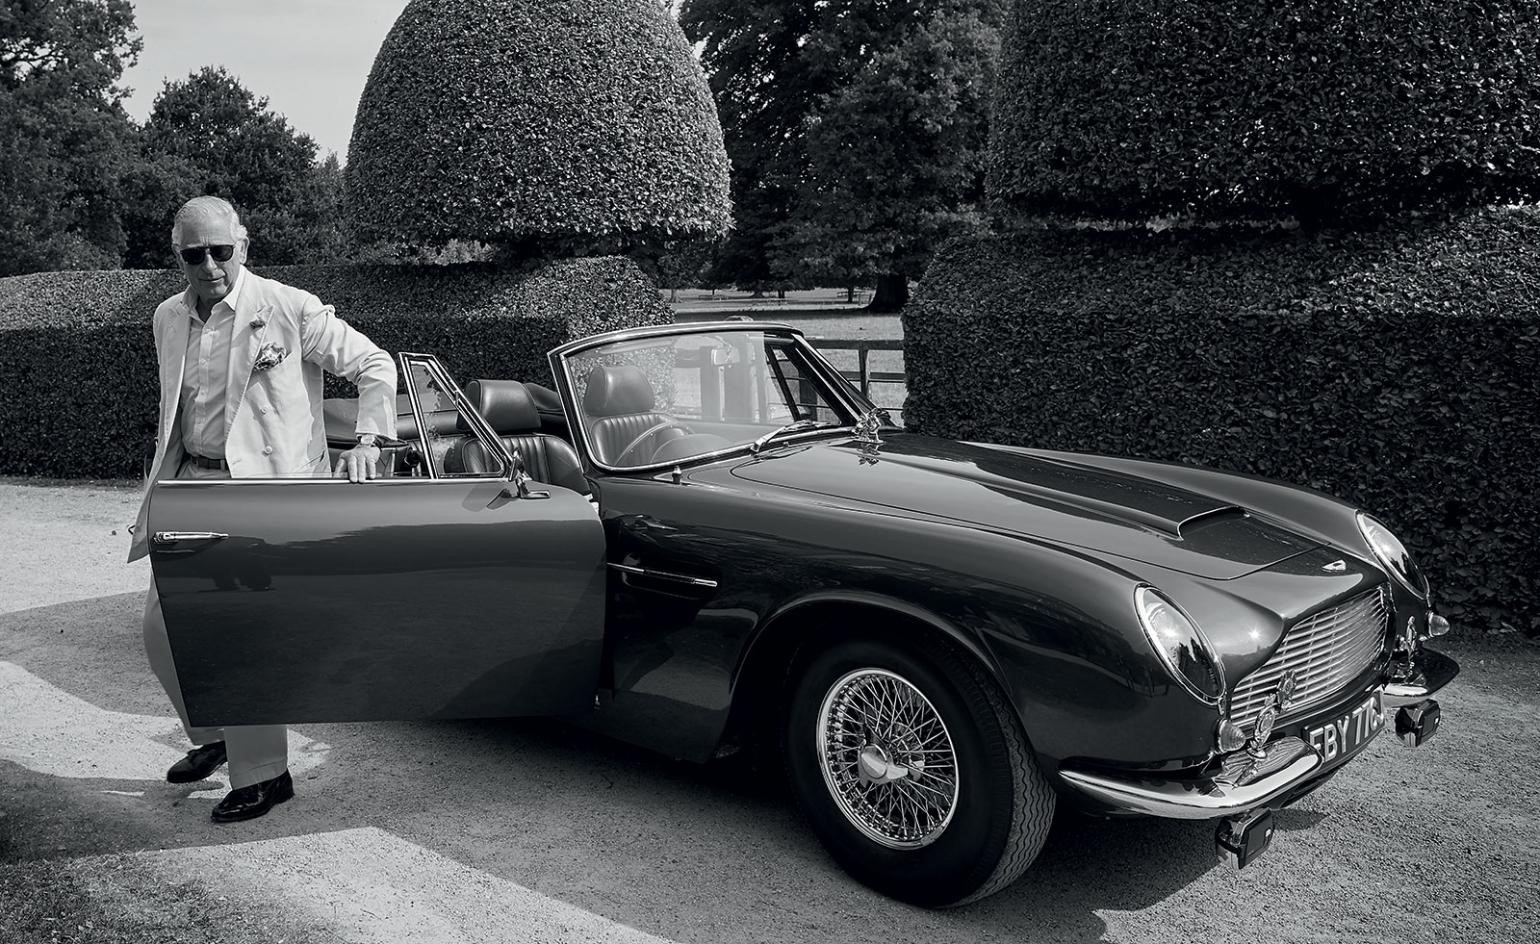 Prince Charles steps from his 1969 Aston Martin DB6 MKII Volante in the grounds of the Highgrove Estate in Gloucestershire. 